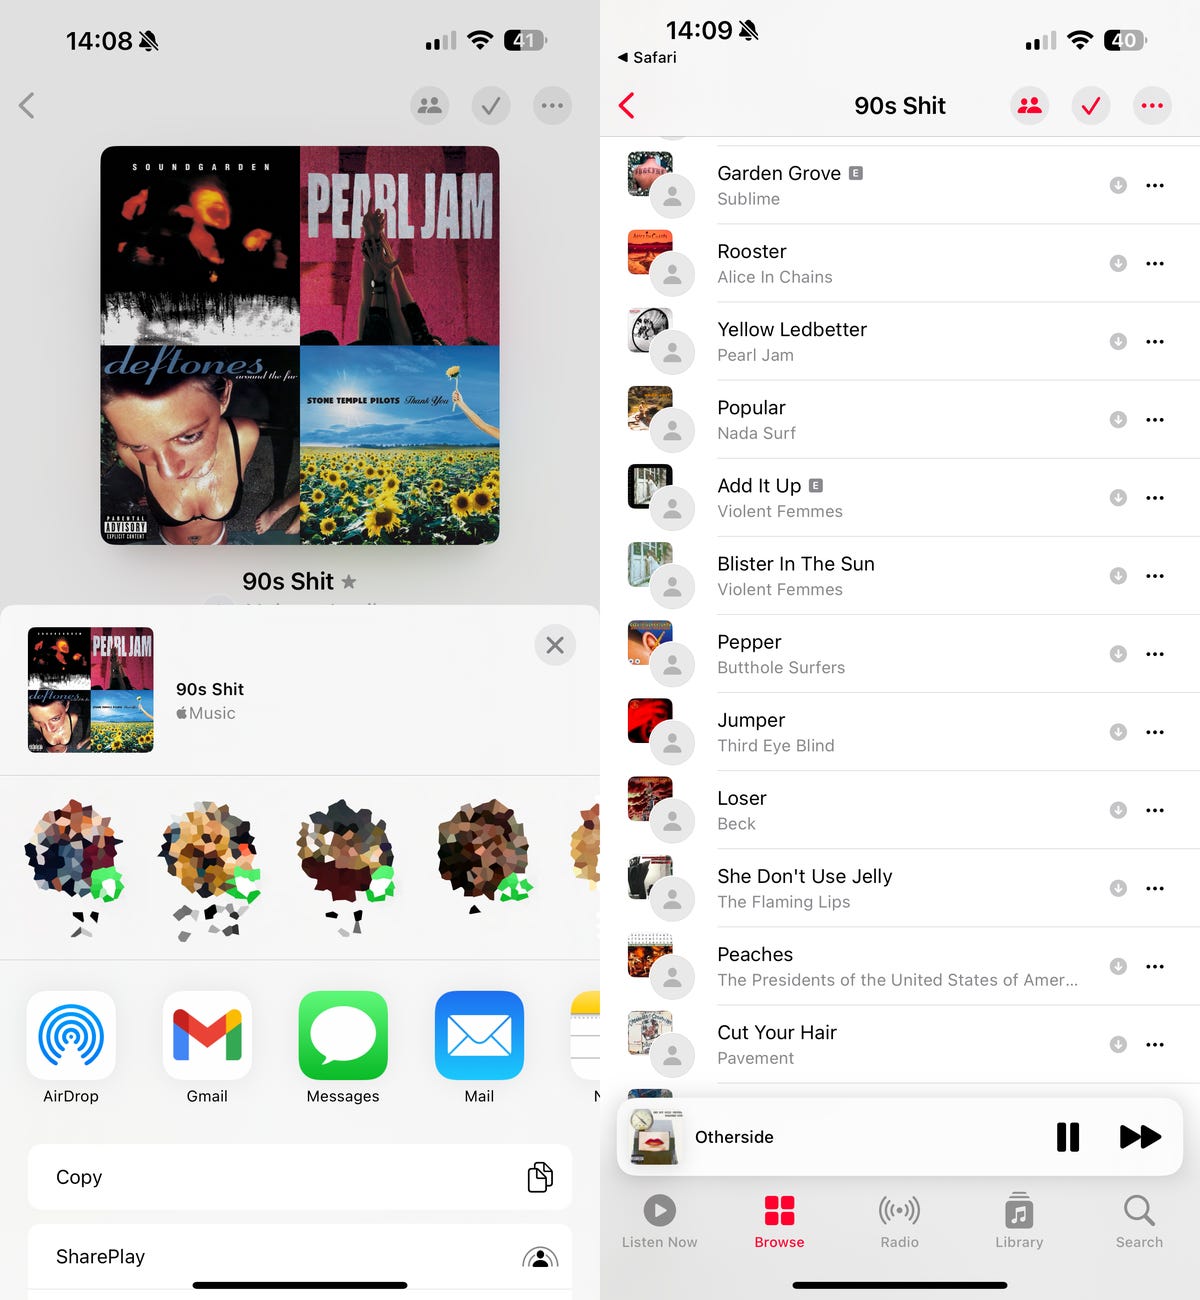 Sharing the playlist link in Apple Music